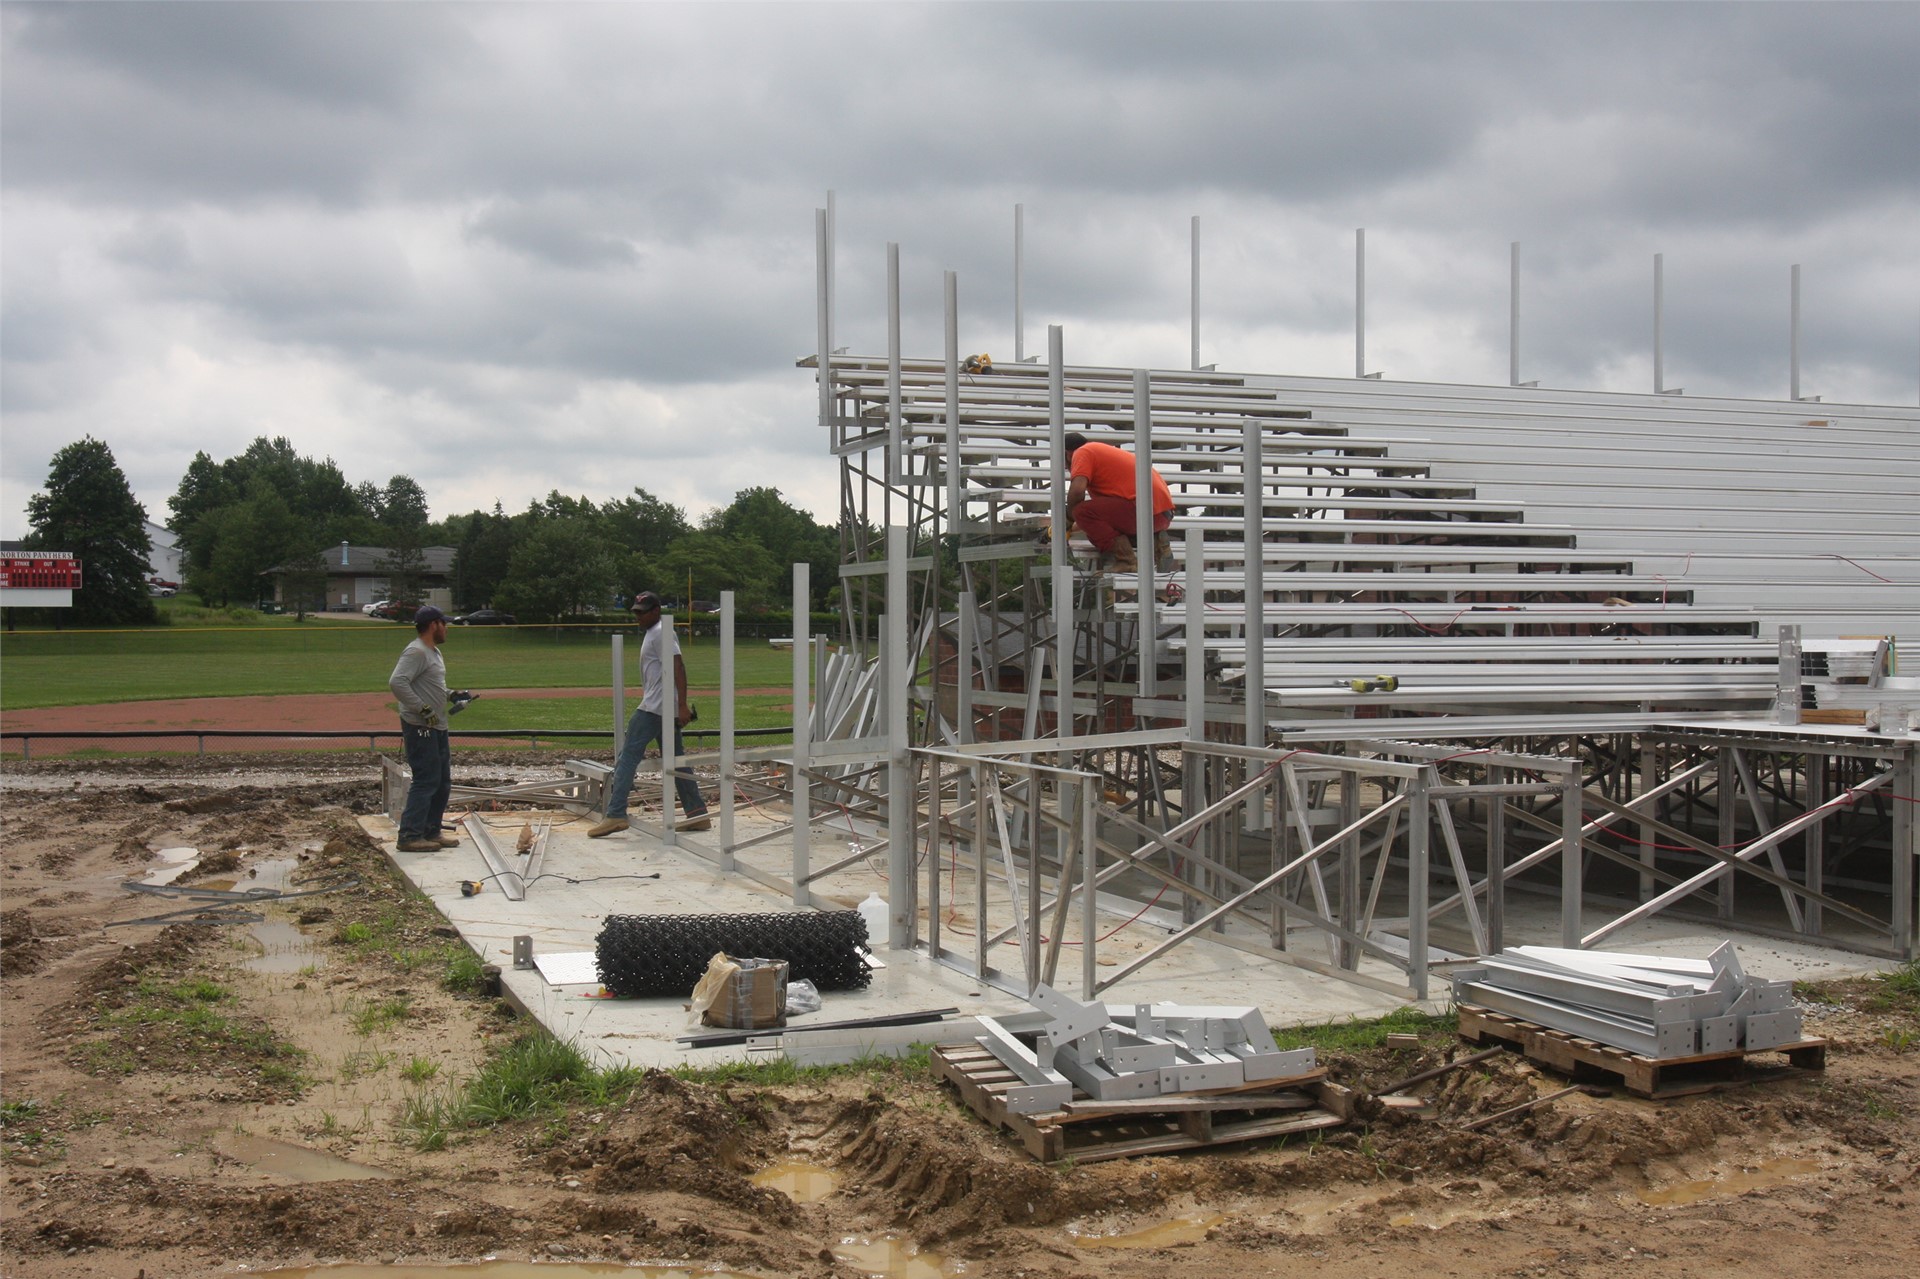 Crew workers assembling the visitor stands